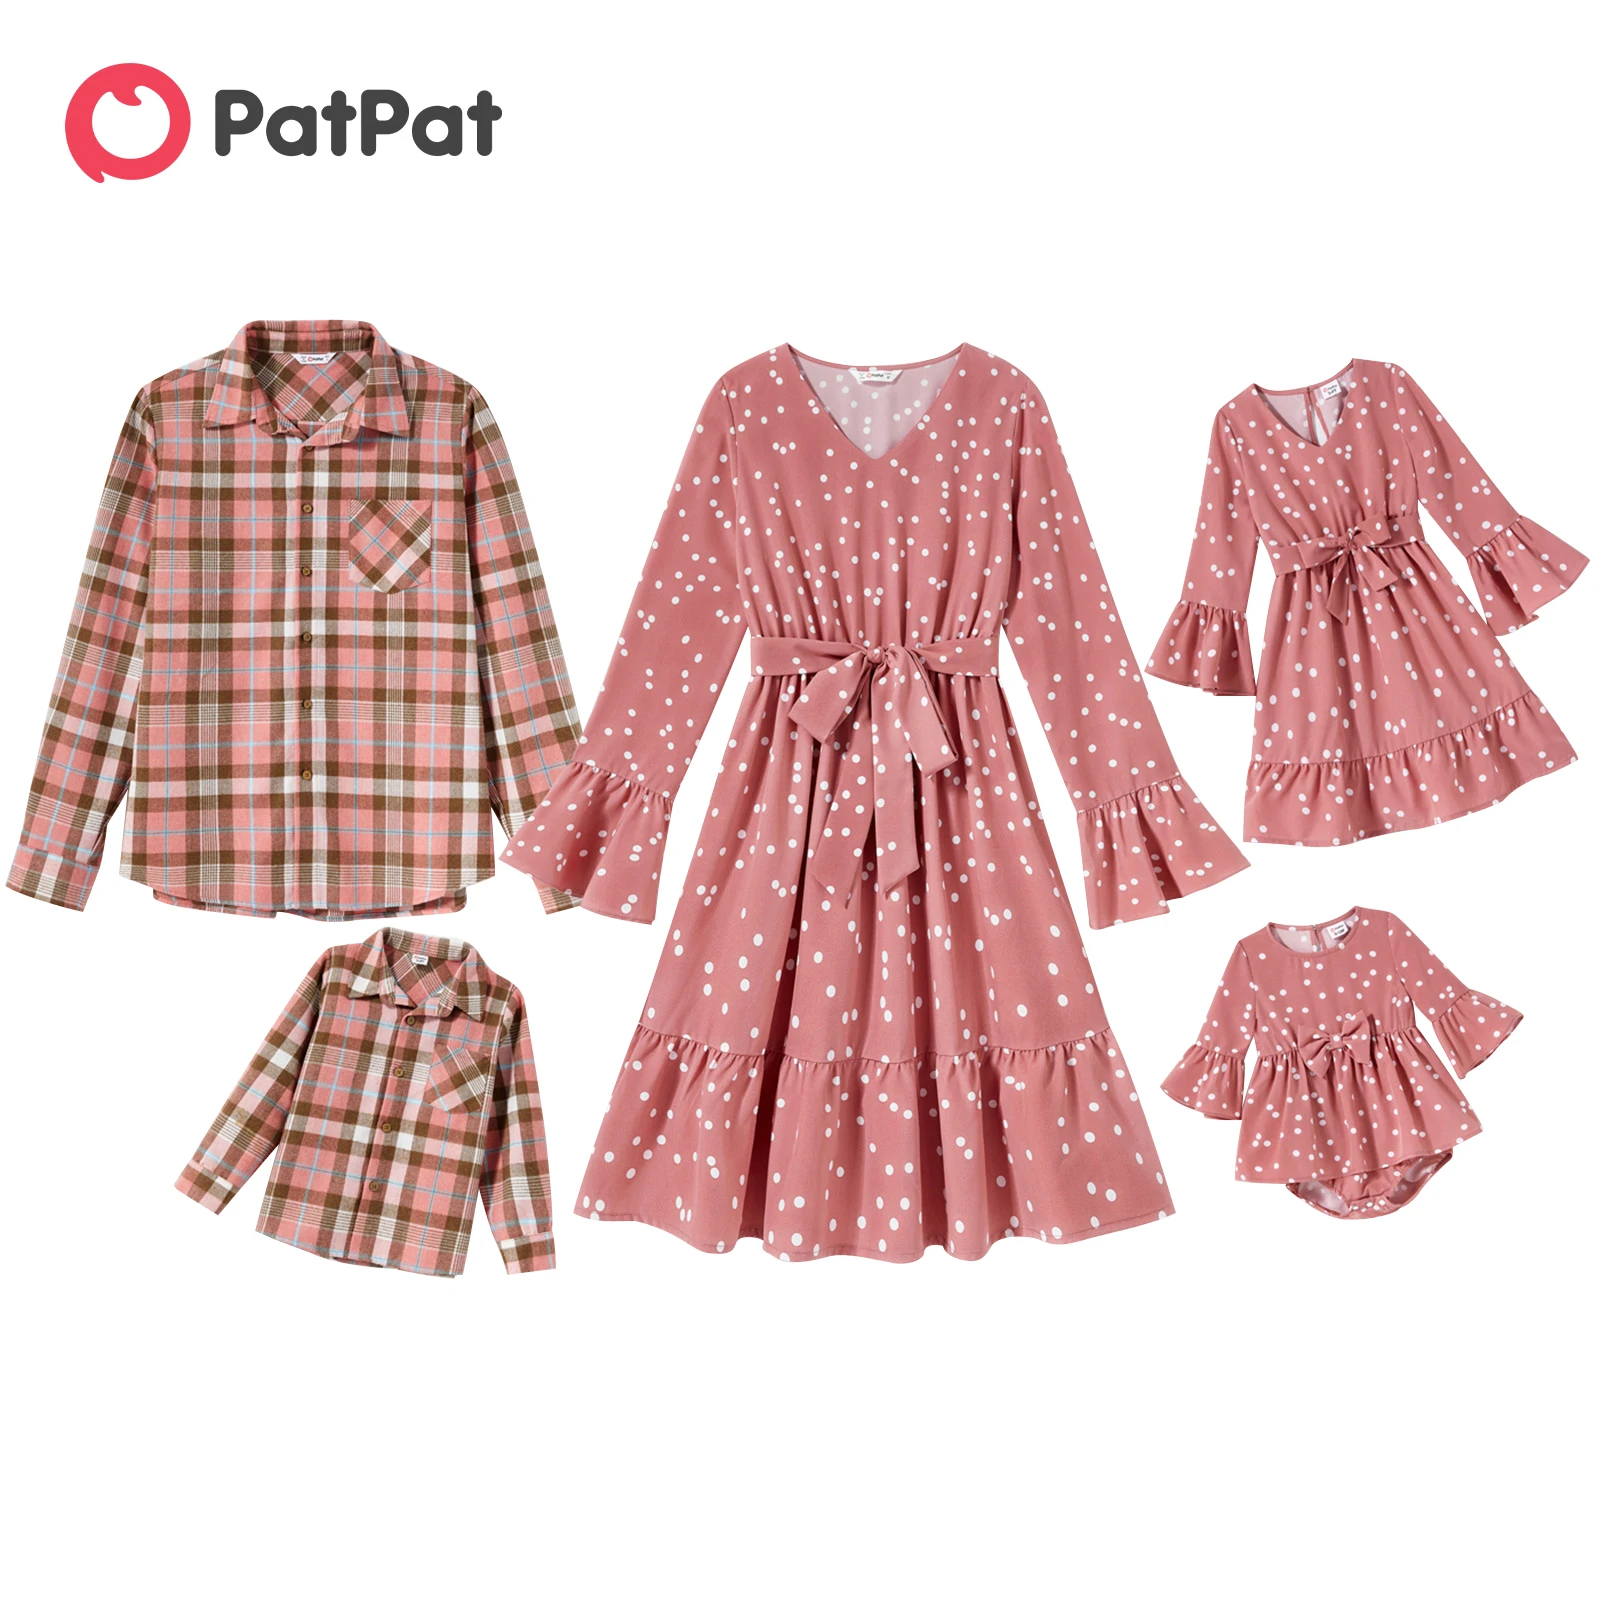 

PatPat Family Matching Outfits Polka Dot Print V Neck Belted Ruffle Hem Bell Sleeve Dresses and Plaid Shirts Sets